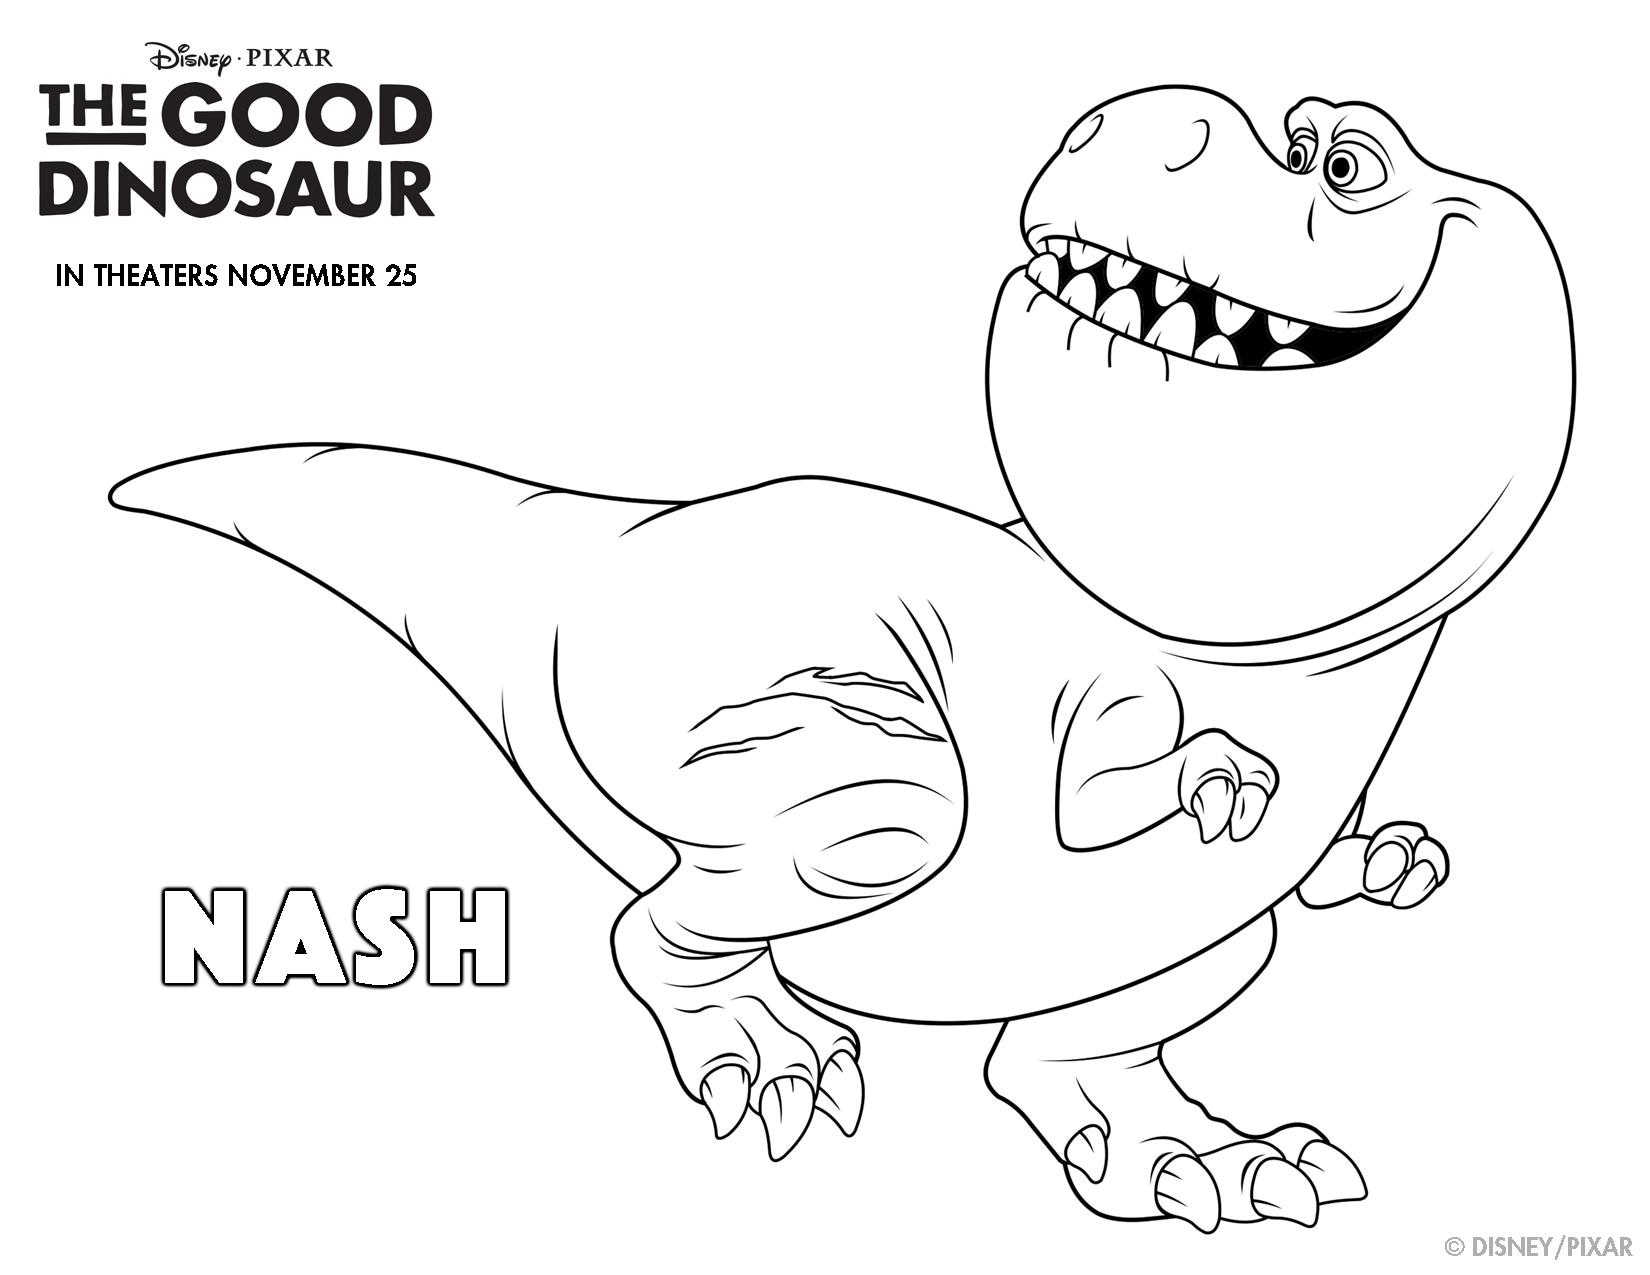 The Good Dinosaur Coloring Pages-page-004 - On the Go in MCO